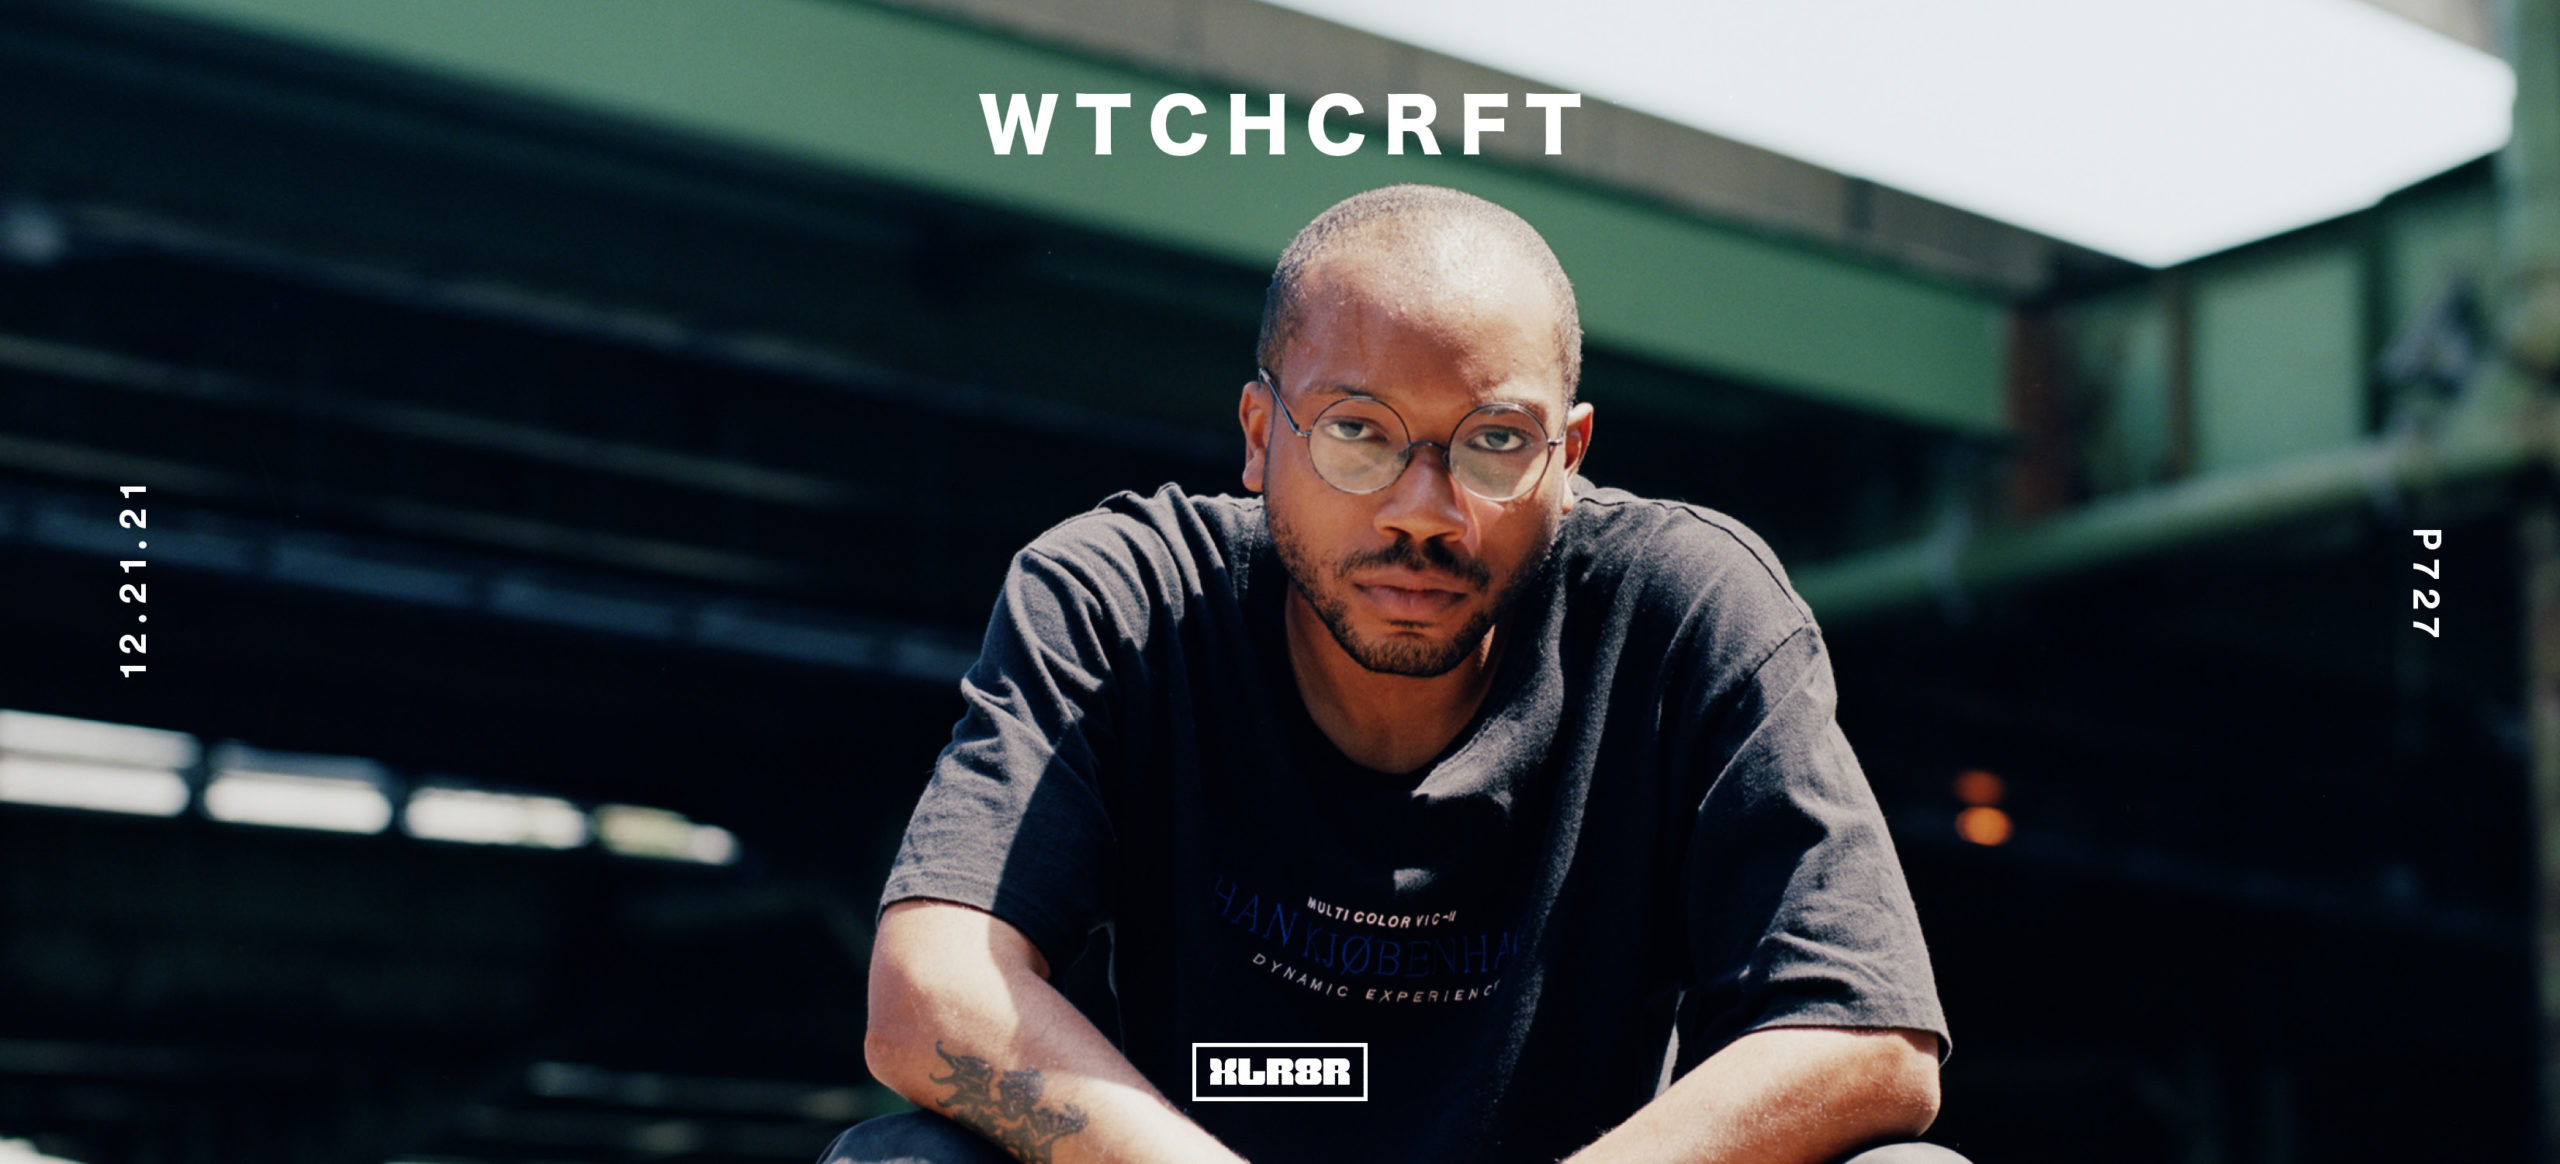 Podcast 727: WTCHCRFTPodcast 727: WTCHCRFT